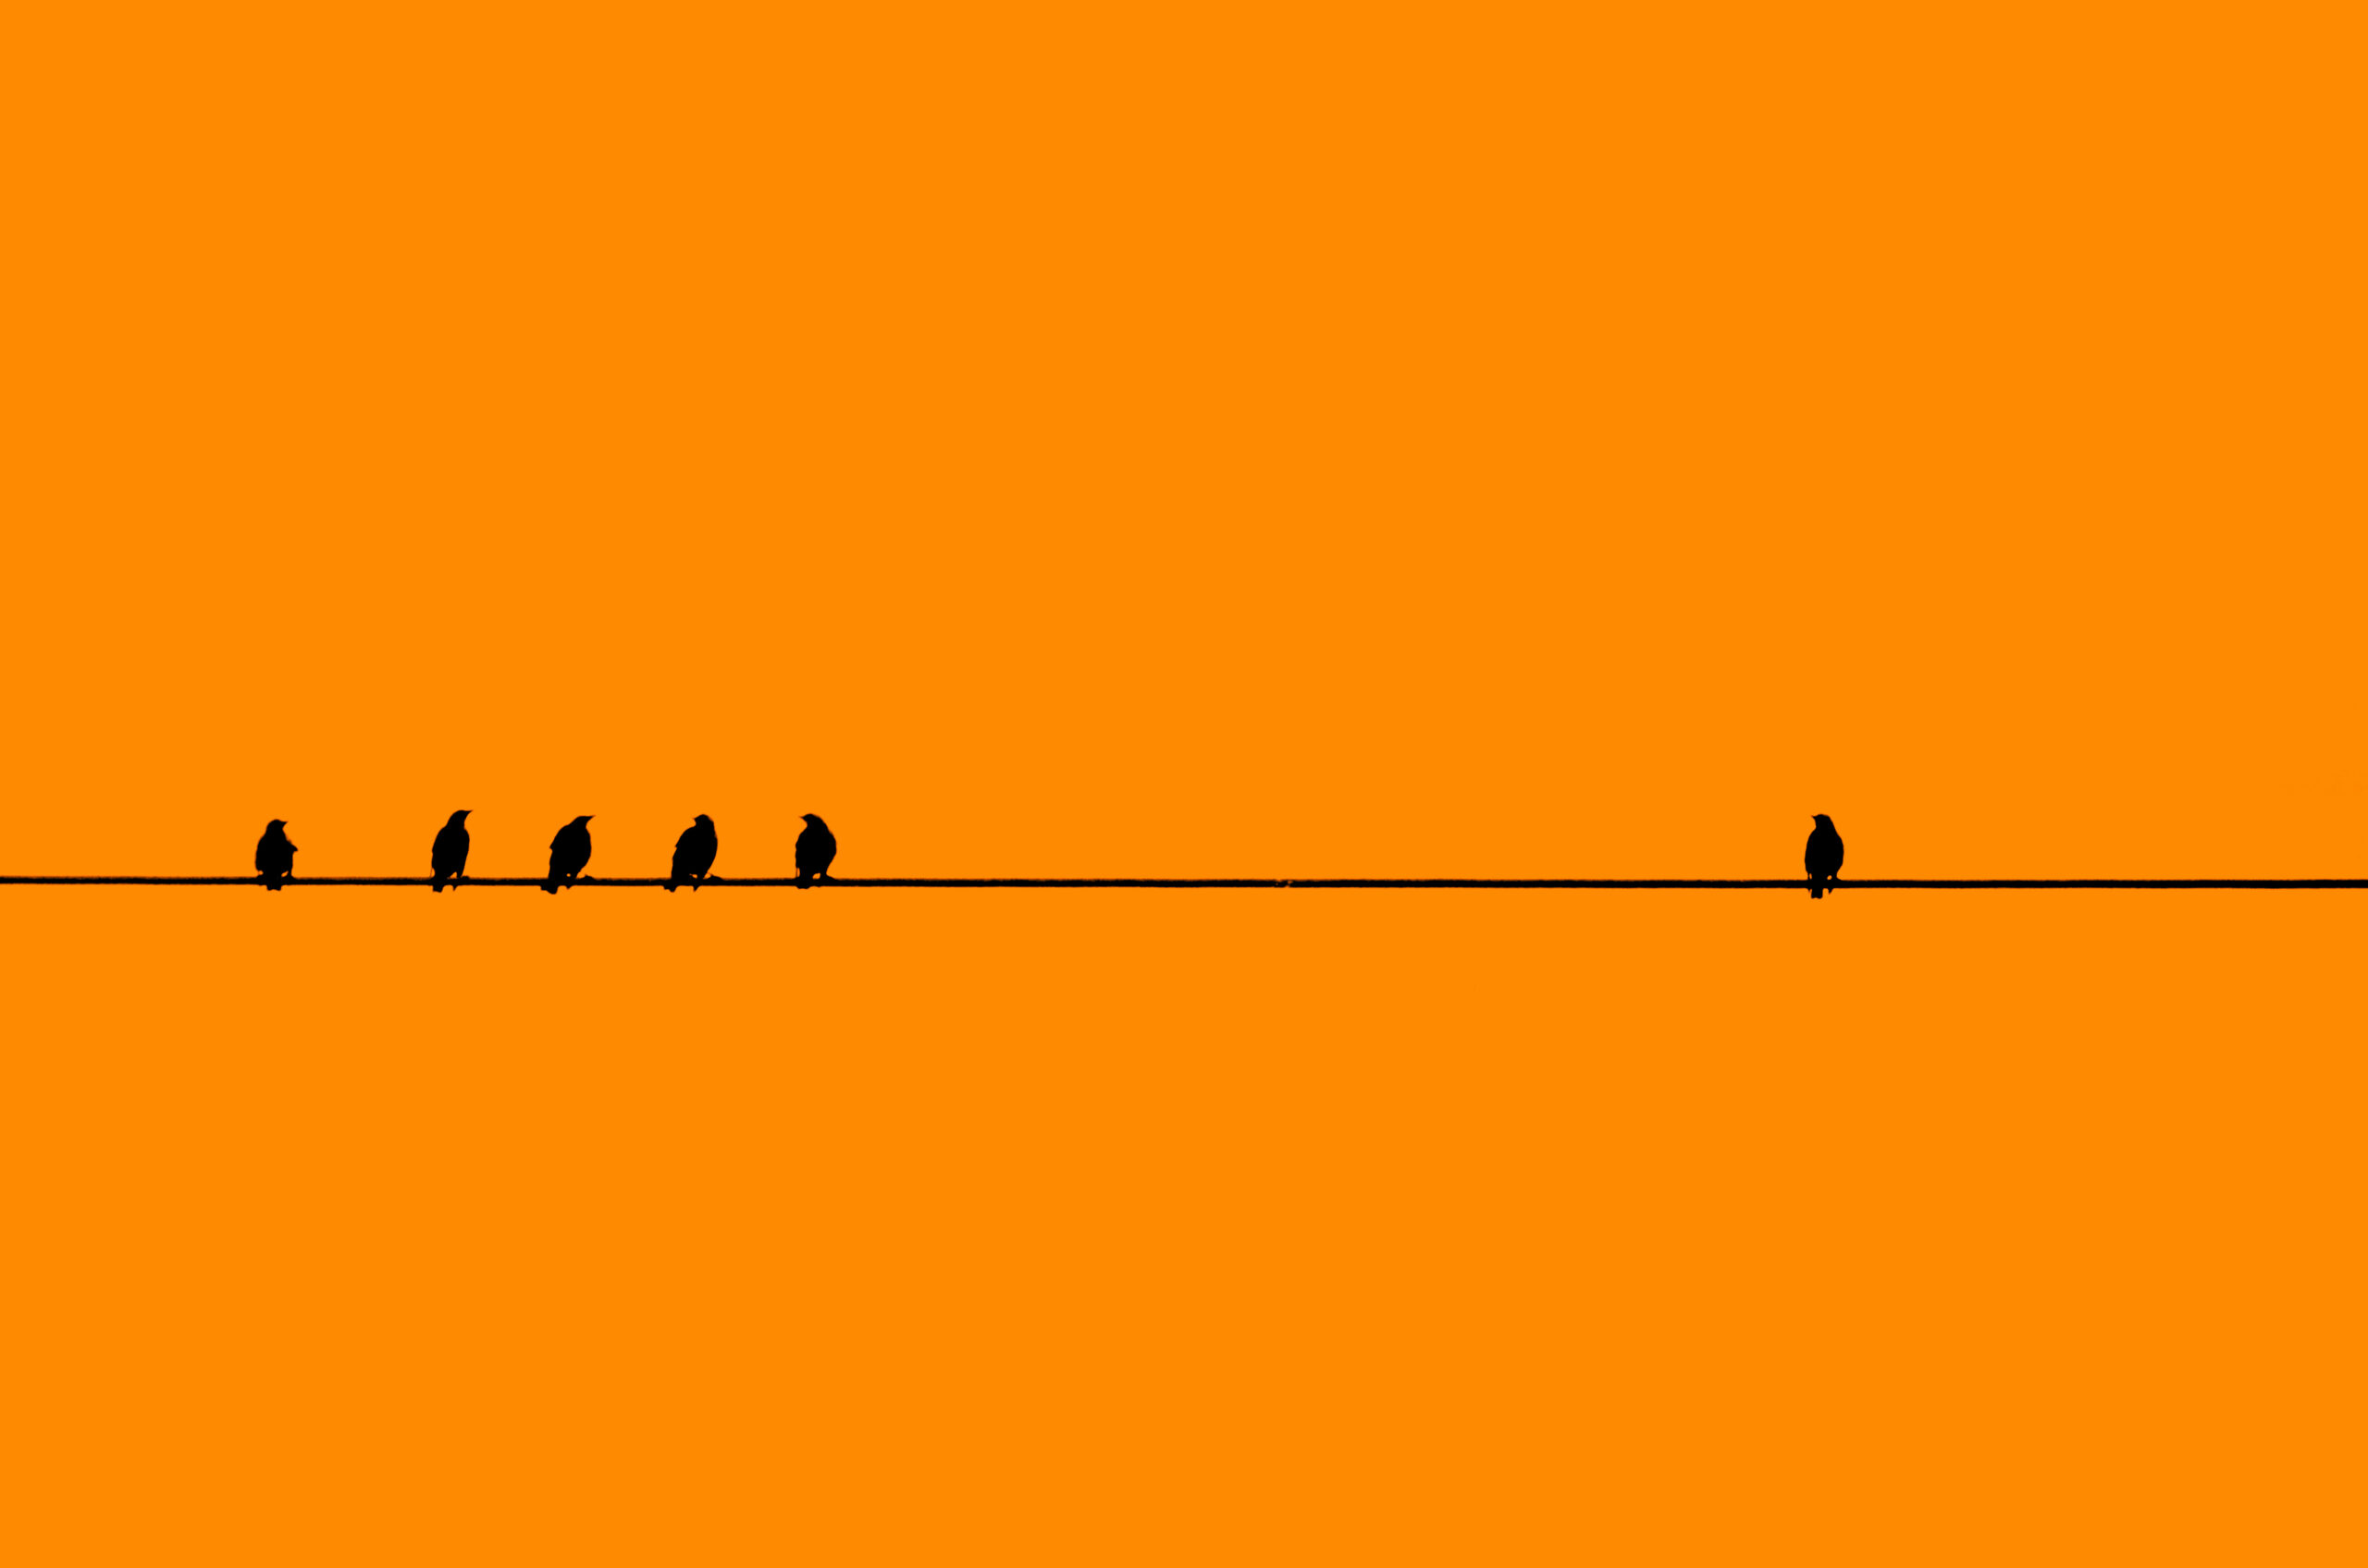 Birds in a Row with one by Itself.